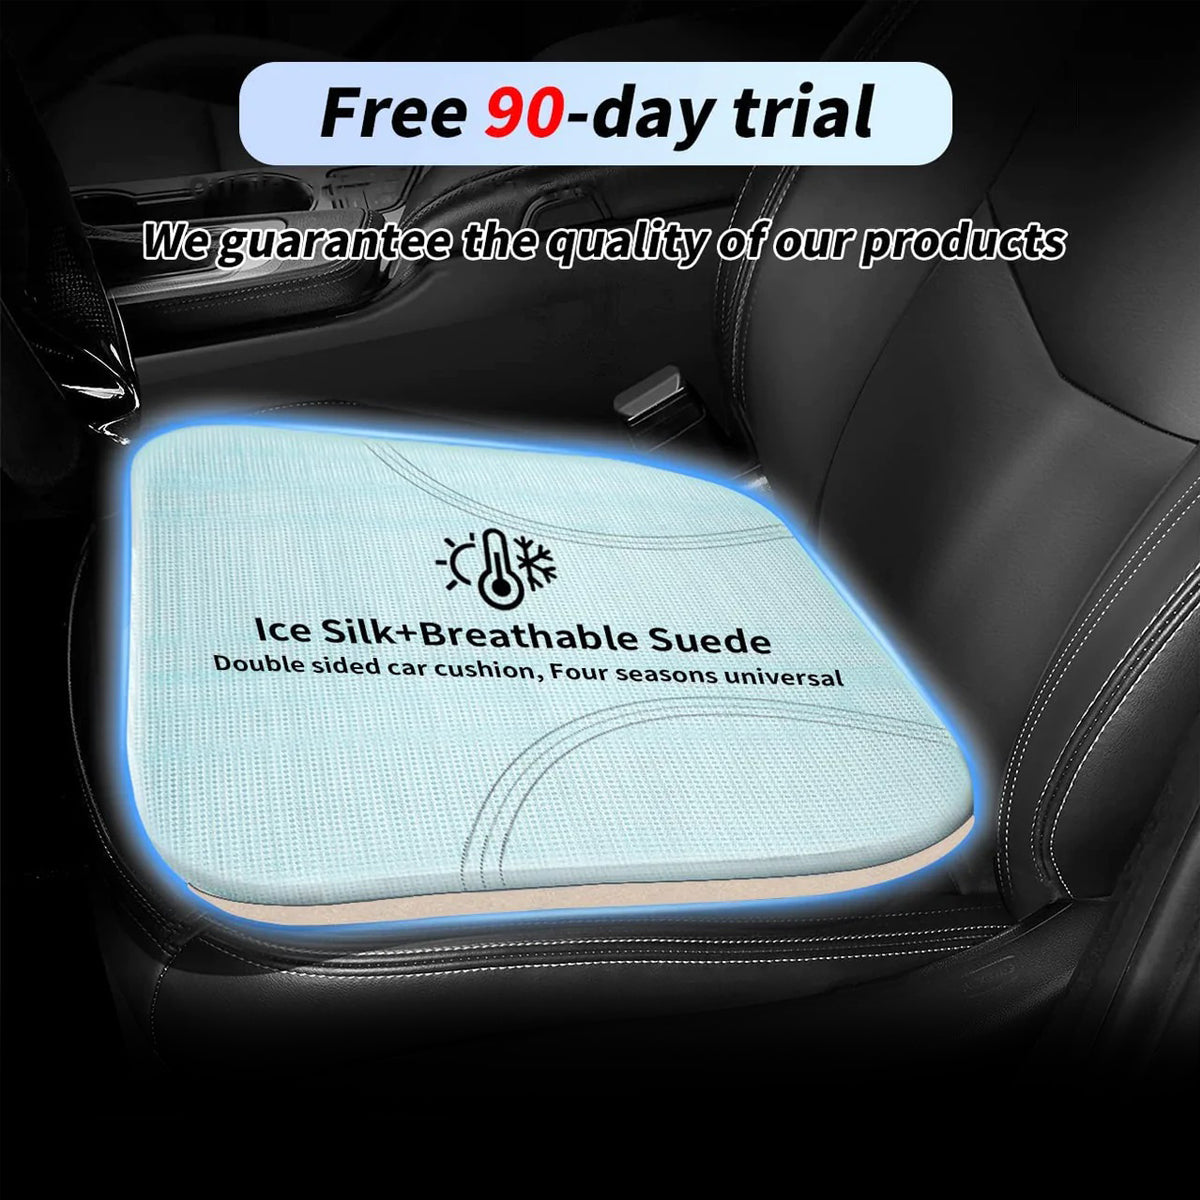 Car Seat Cushion, Custom For Cars, Car Memory Foam Seat Cushion, Heightening Seat Cushion, Seat Cushion for Car and Office Chair JE19999 - Delicate Leather